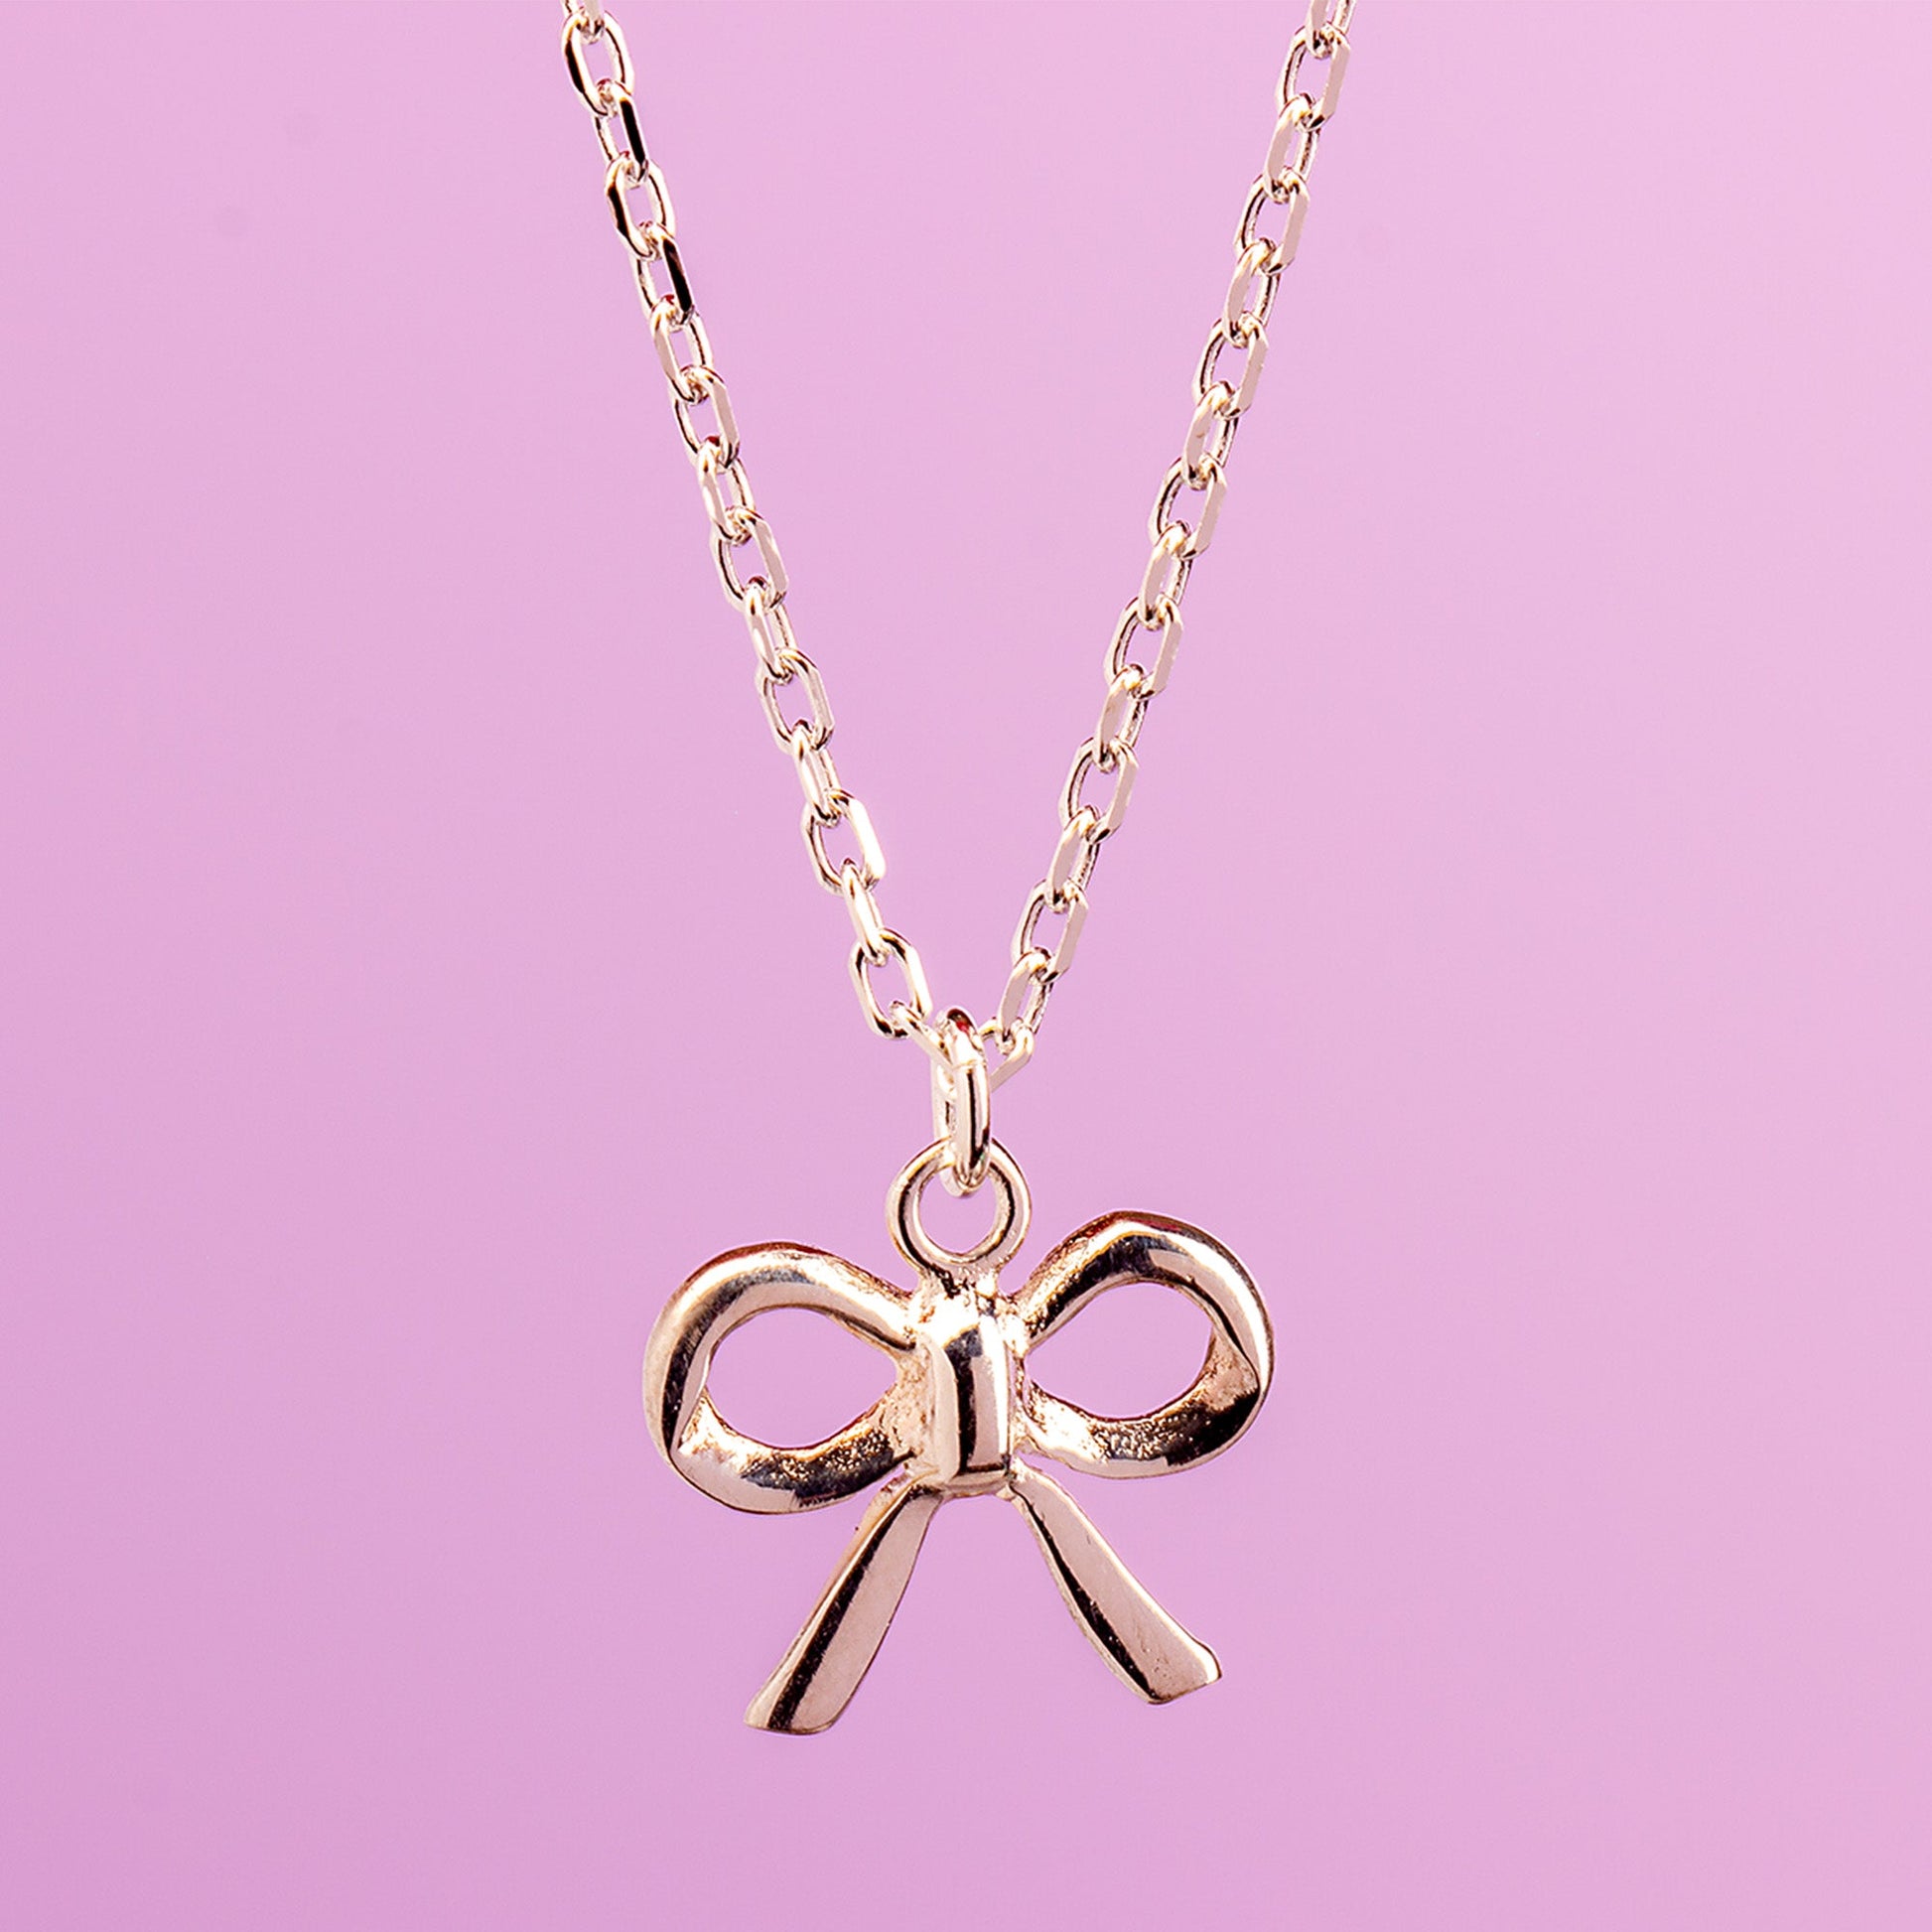 Bow Necklace - Sterling Silver - MYLEE London